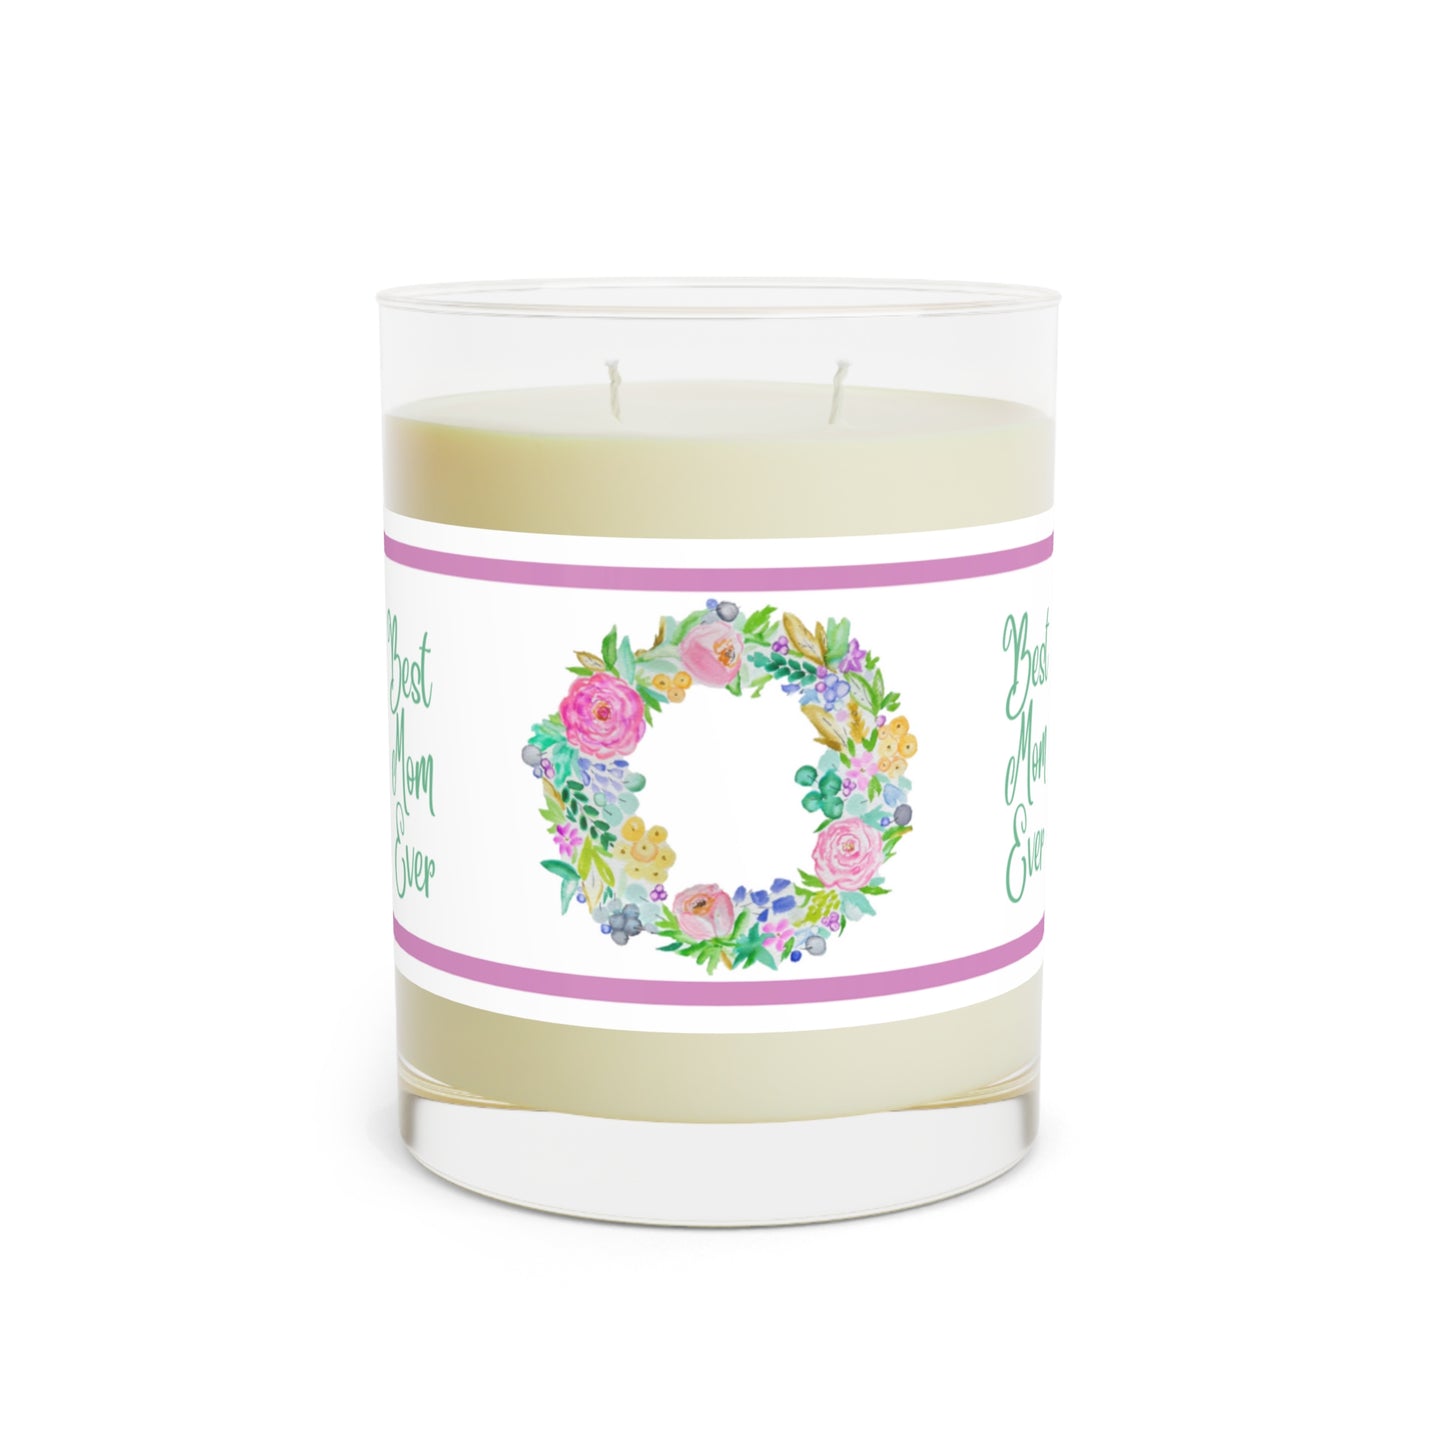 Wing Light Art Designs Best Mom Ever (Pink) Scented Candle - Full Glass, 11oz